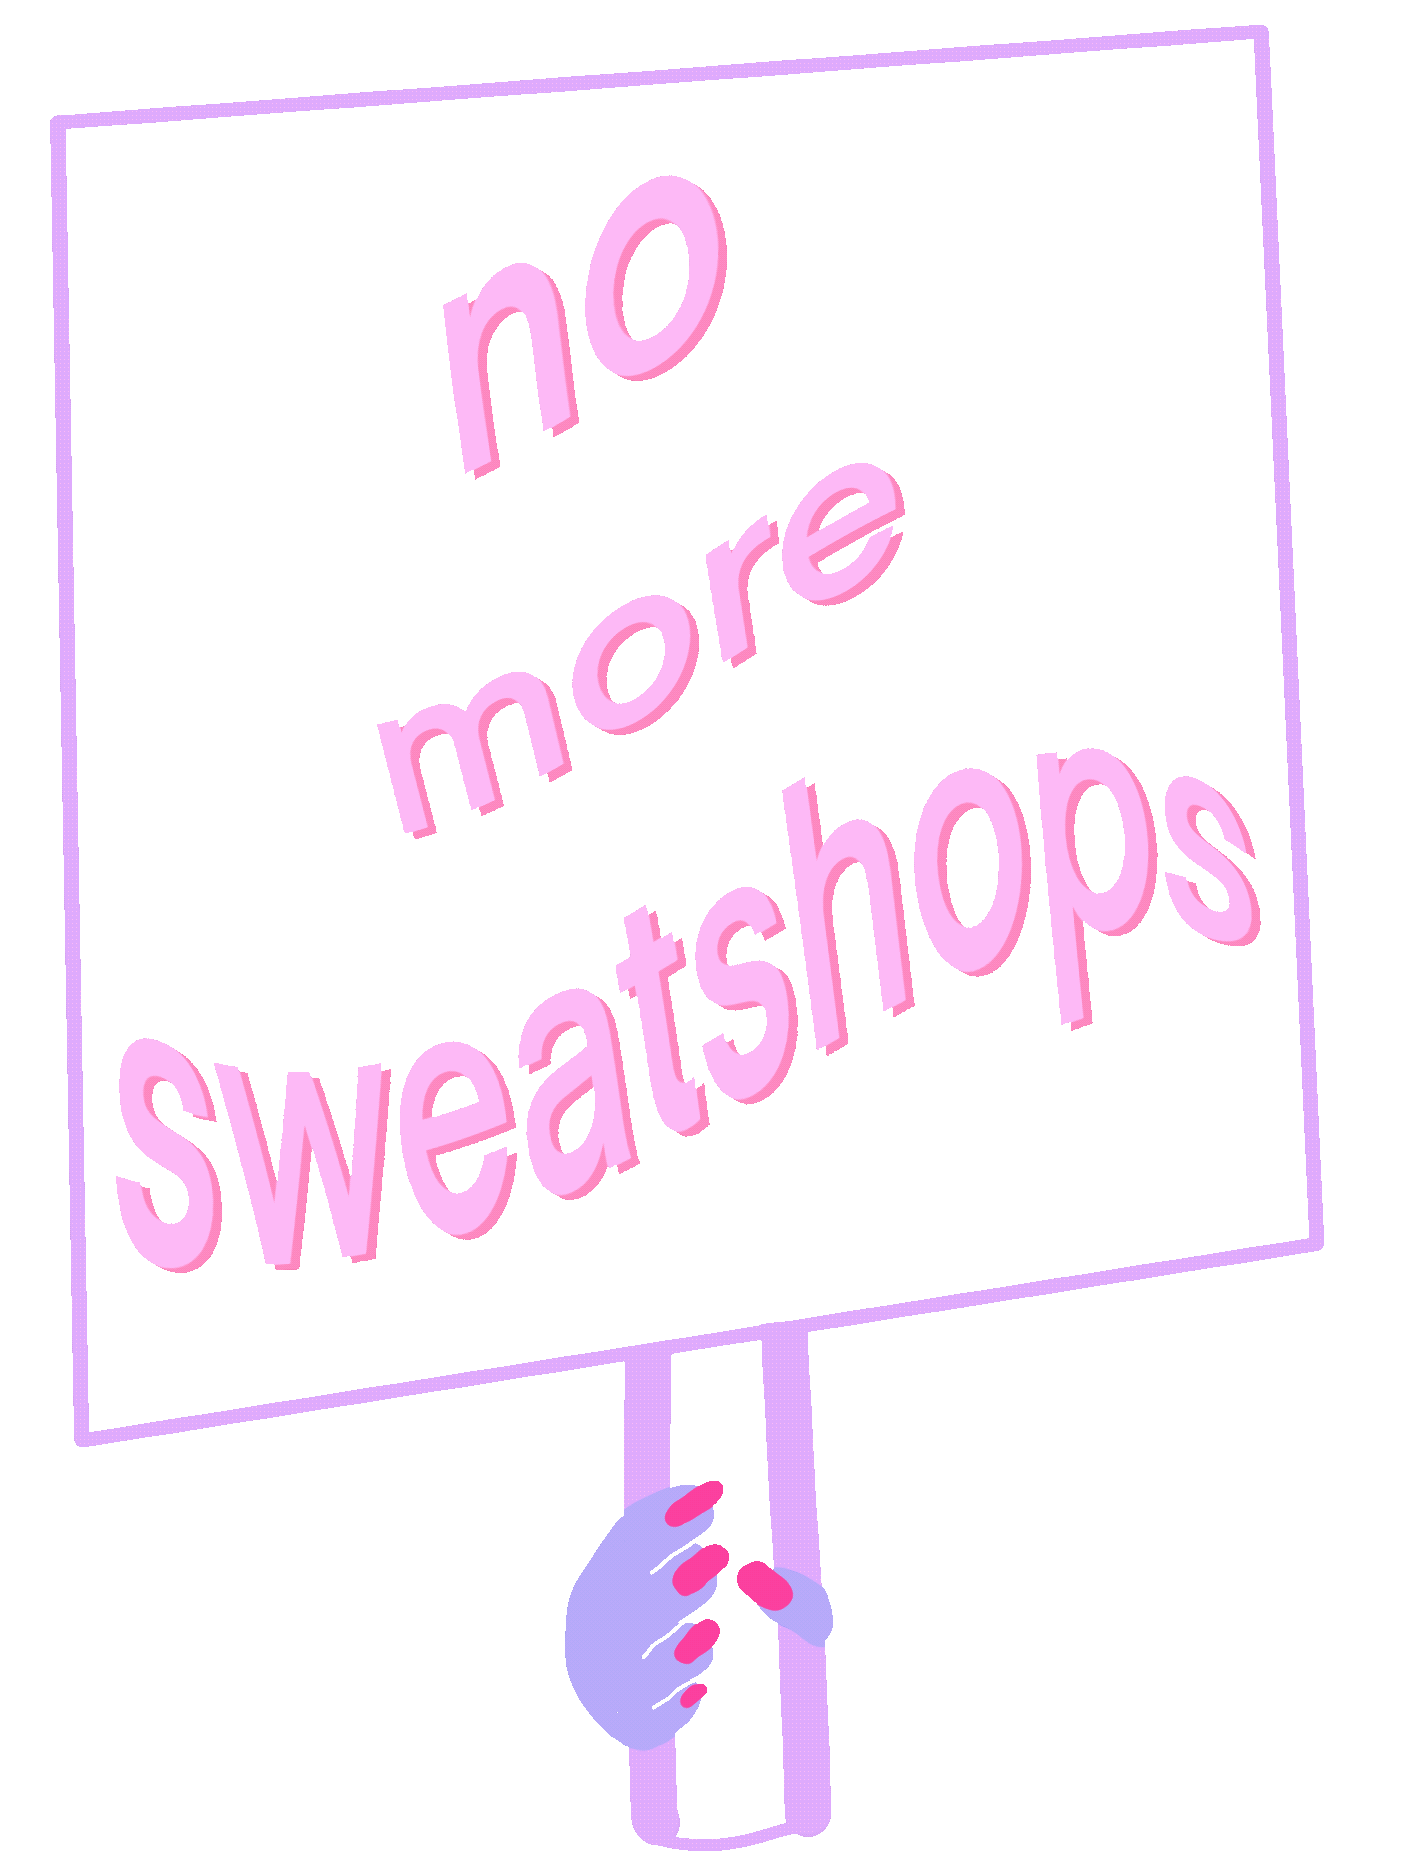 the ethical alternative to fast fashion - no more sweatshops